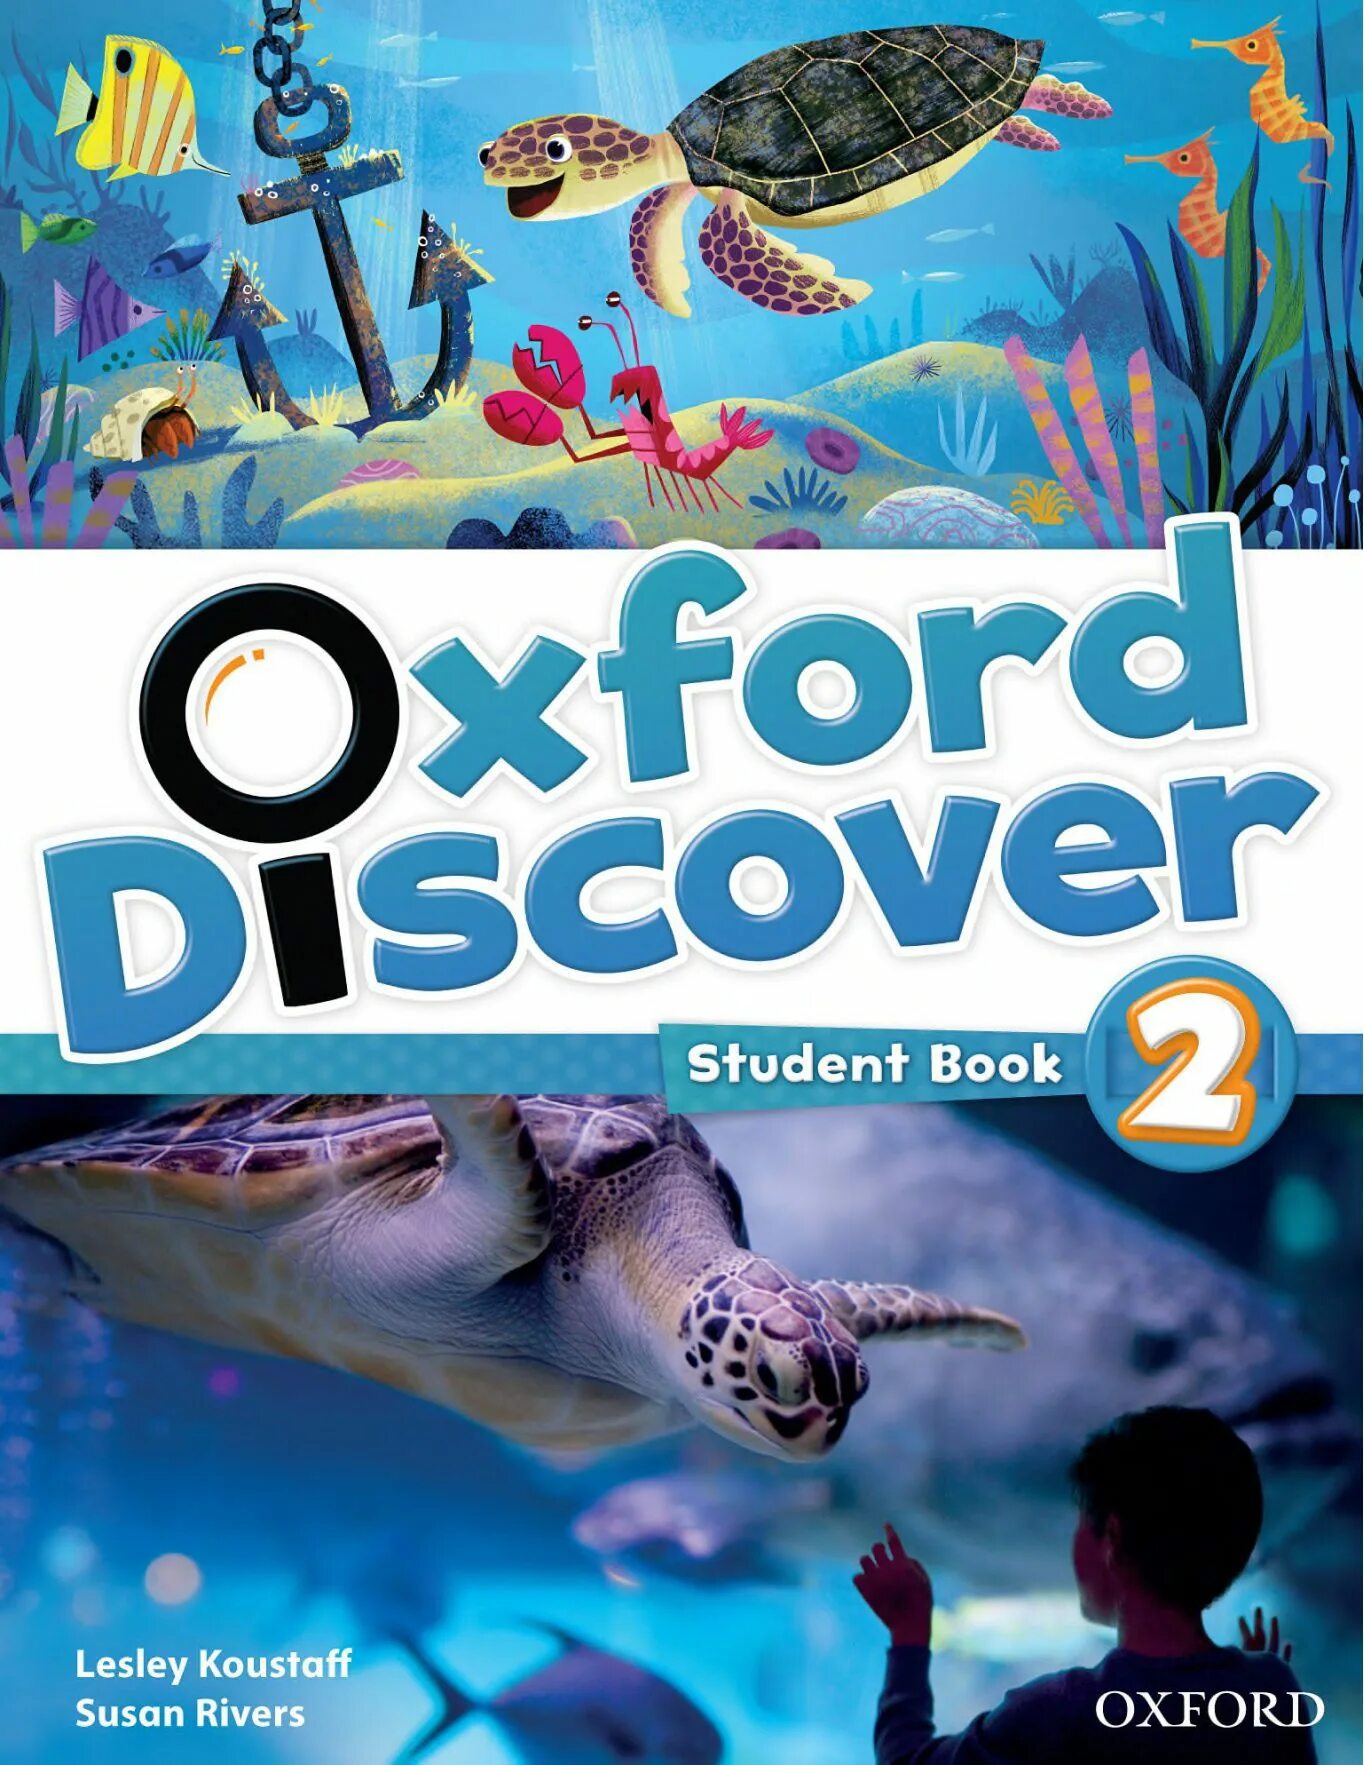 Discover students book. Oxford discover 2nd Edition. Oxford Discovery 2. Oxford discover 1 student book. Oxford Discovery student's book.